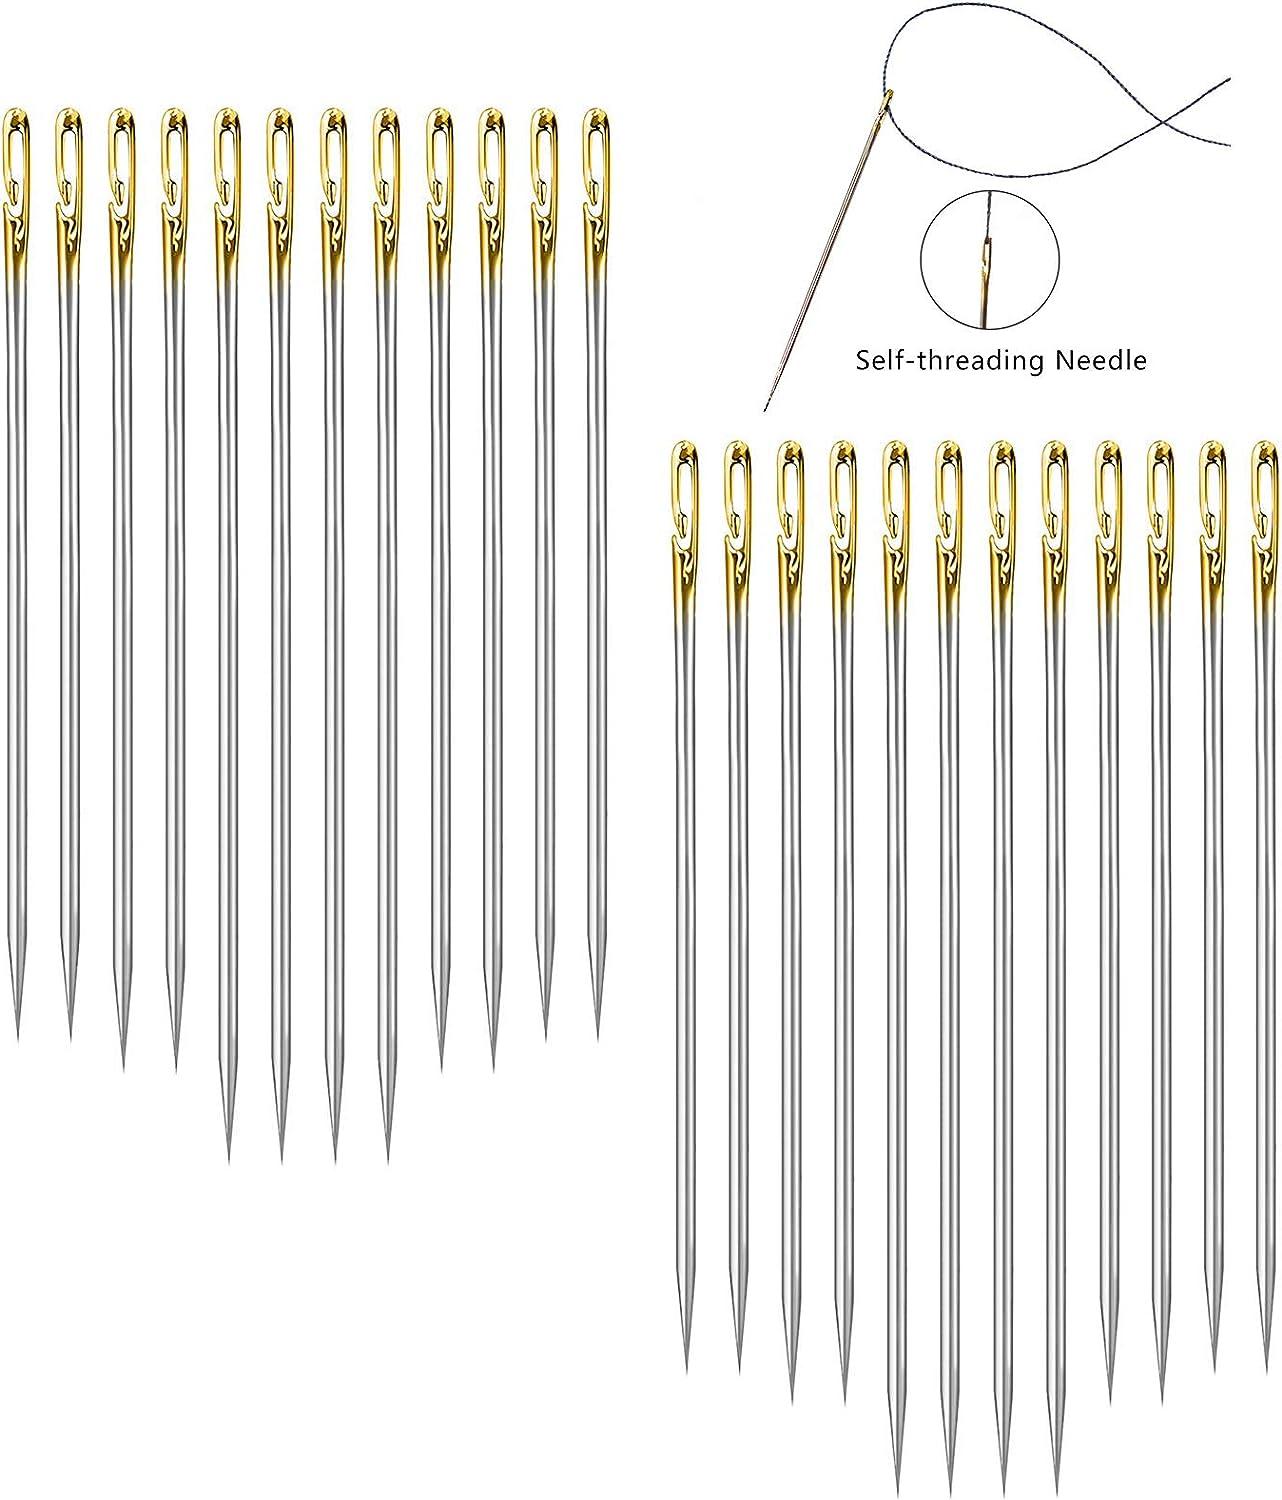 24 Pcs Self Threading Needles, Big Eye Hand Sewing Needles Embroidery Needle for DIY Craft with Vintage Sewing Needles Holder Storage Case